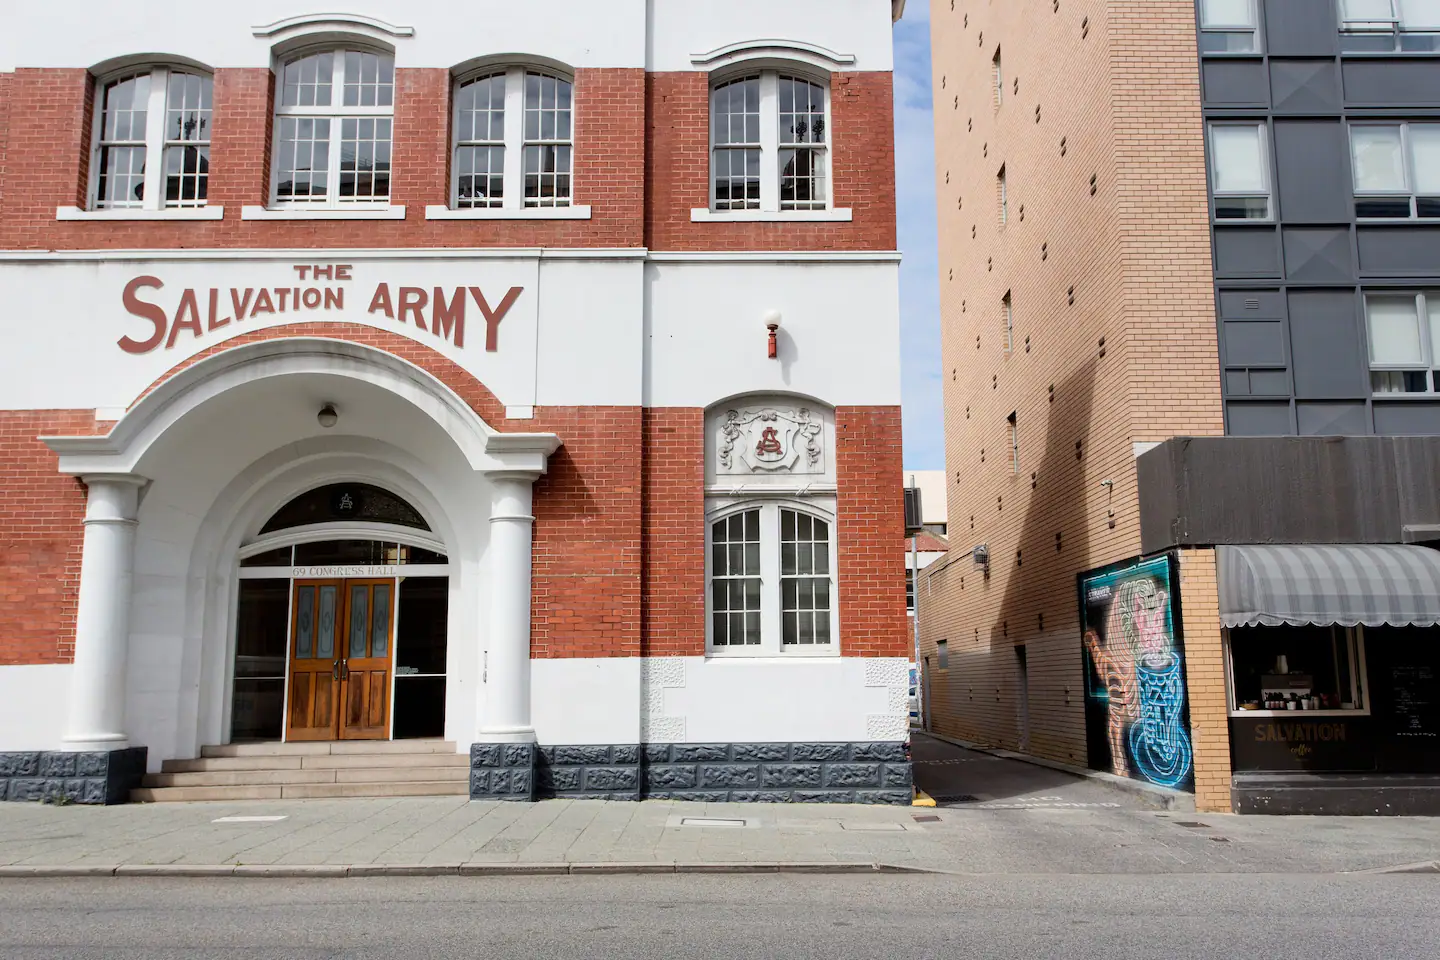 Outside view of the red and white Salvation Army Heritage building